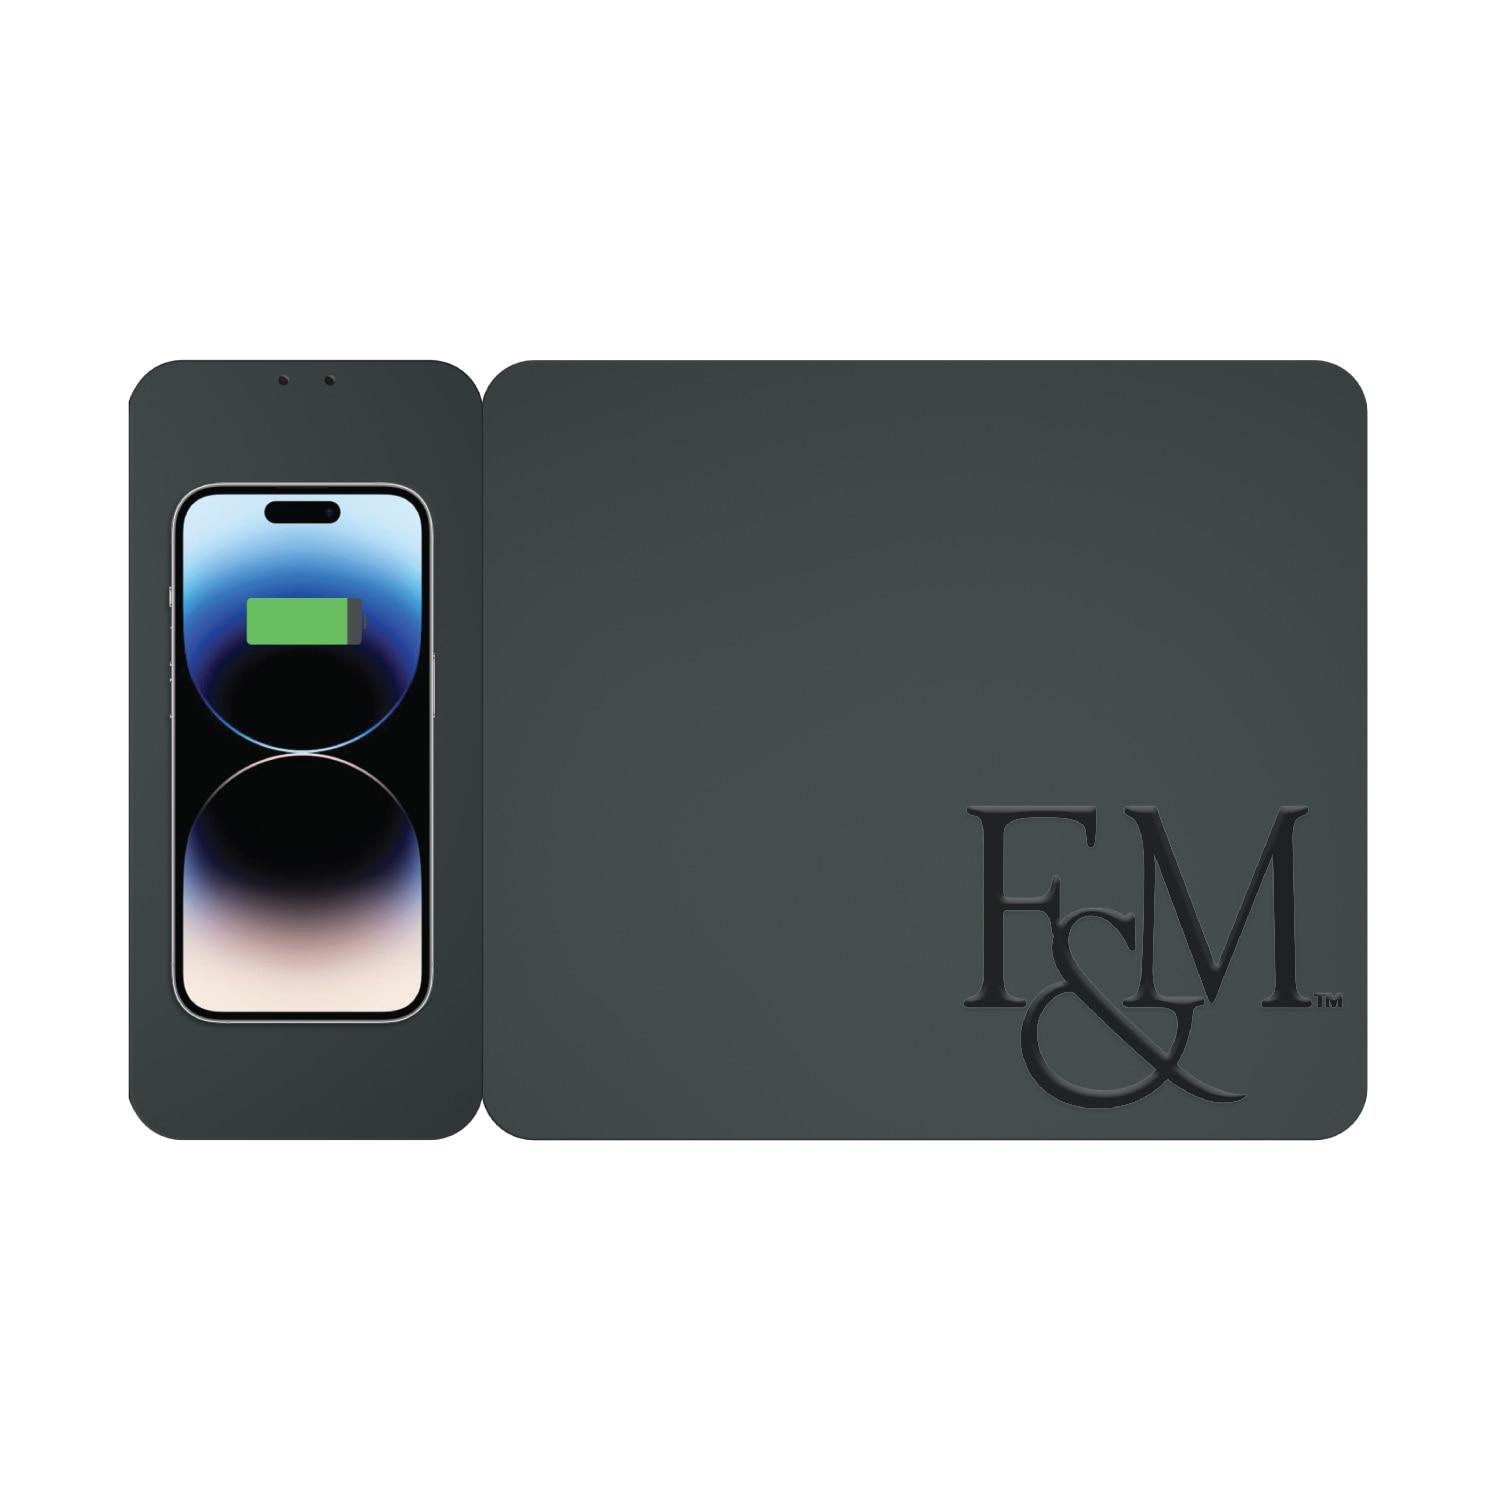 Franklin & Marshall College Leather Wireless Charging Mouse Pad, Black, Alumni V2